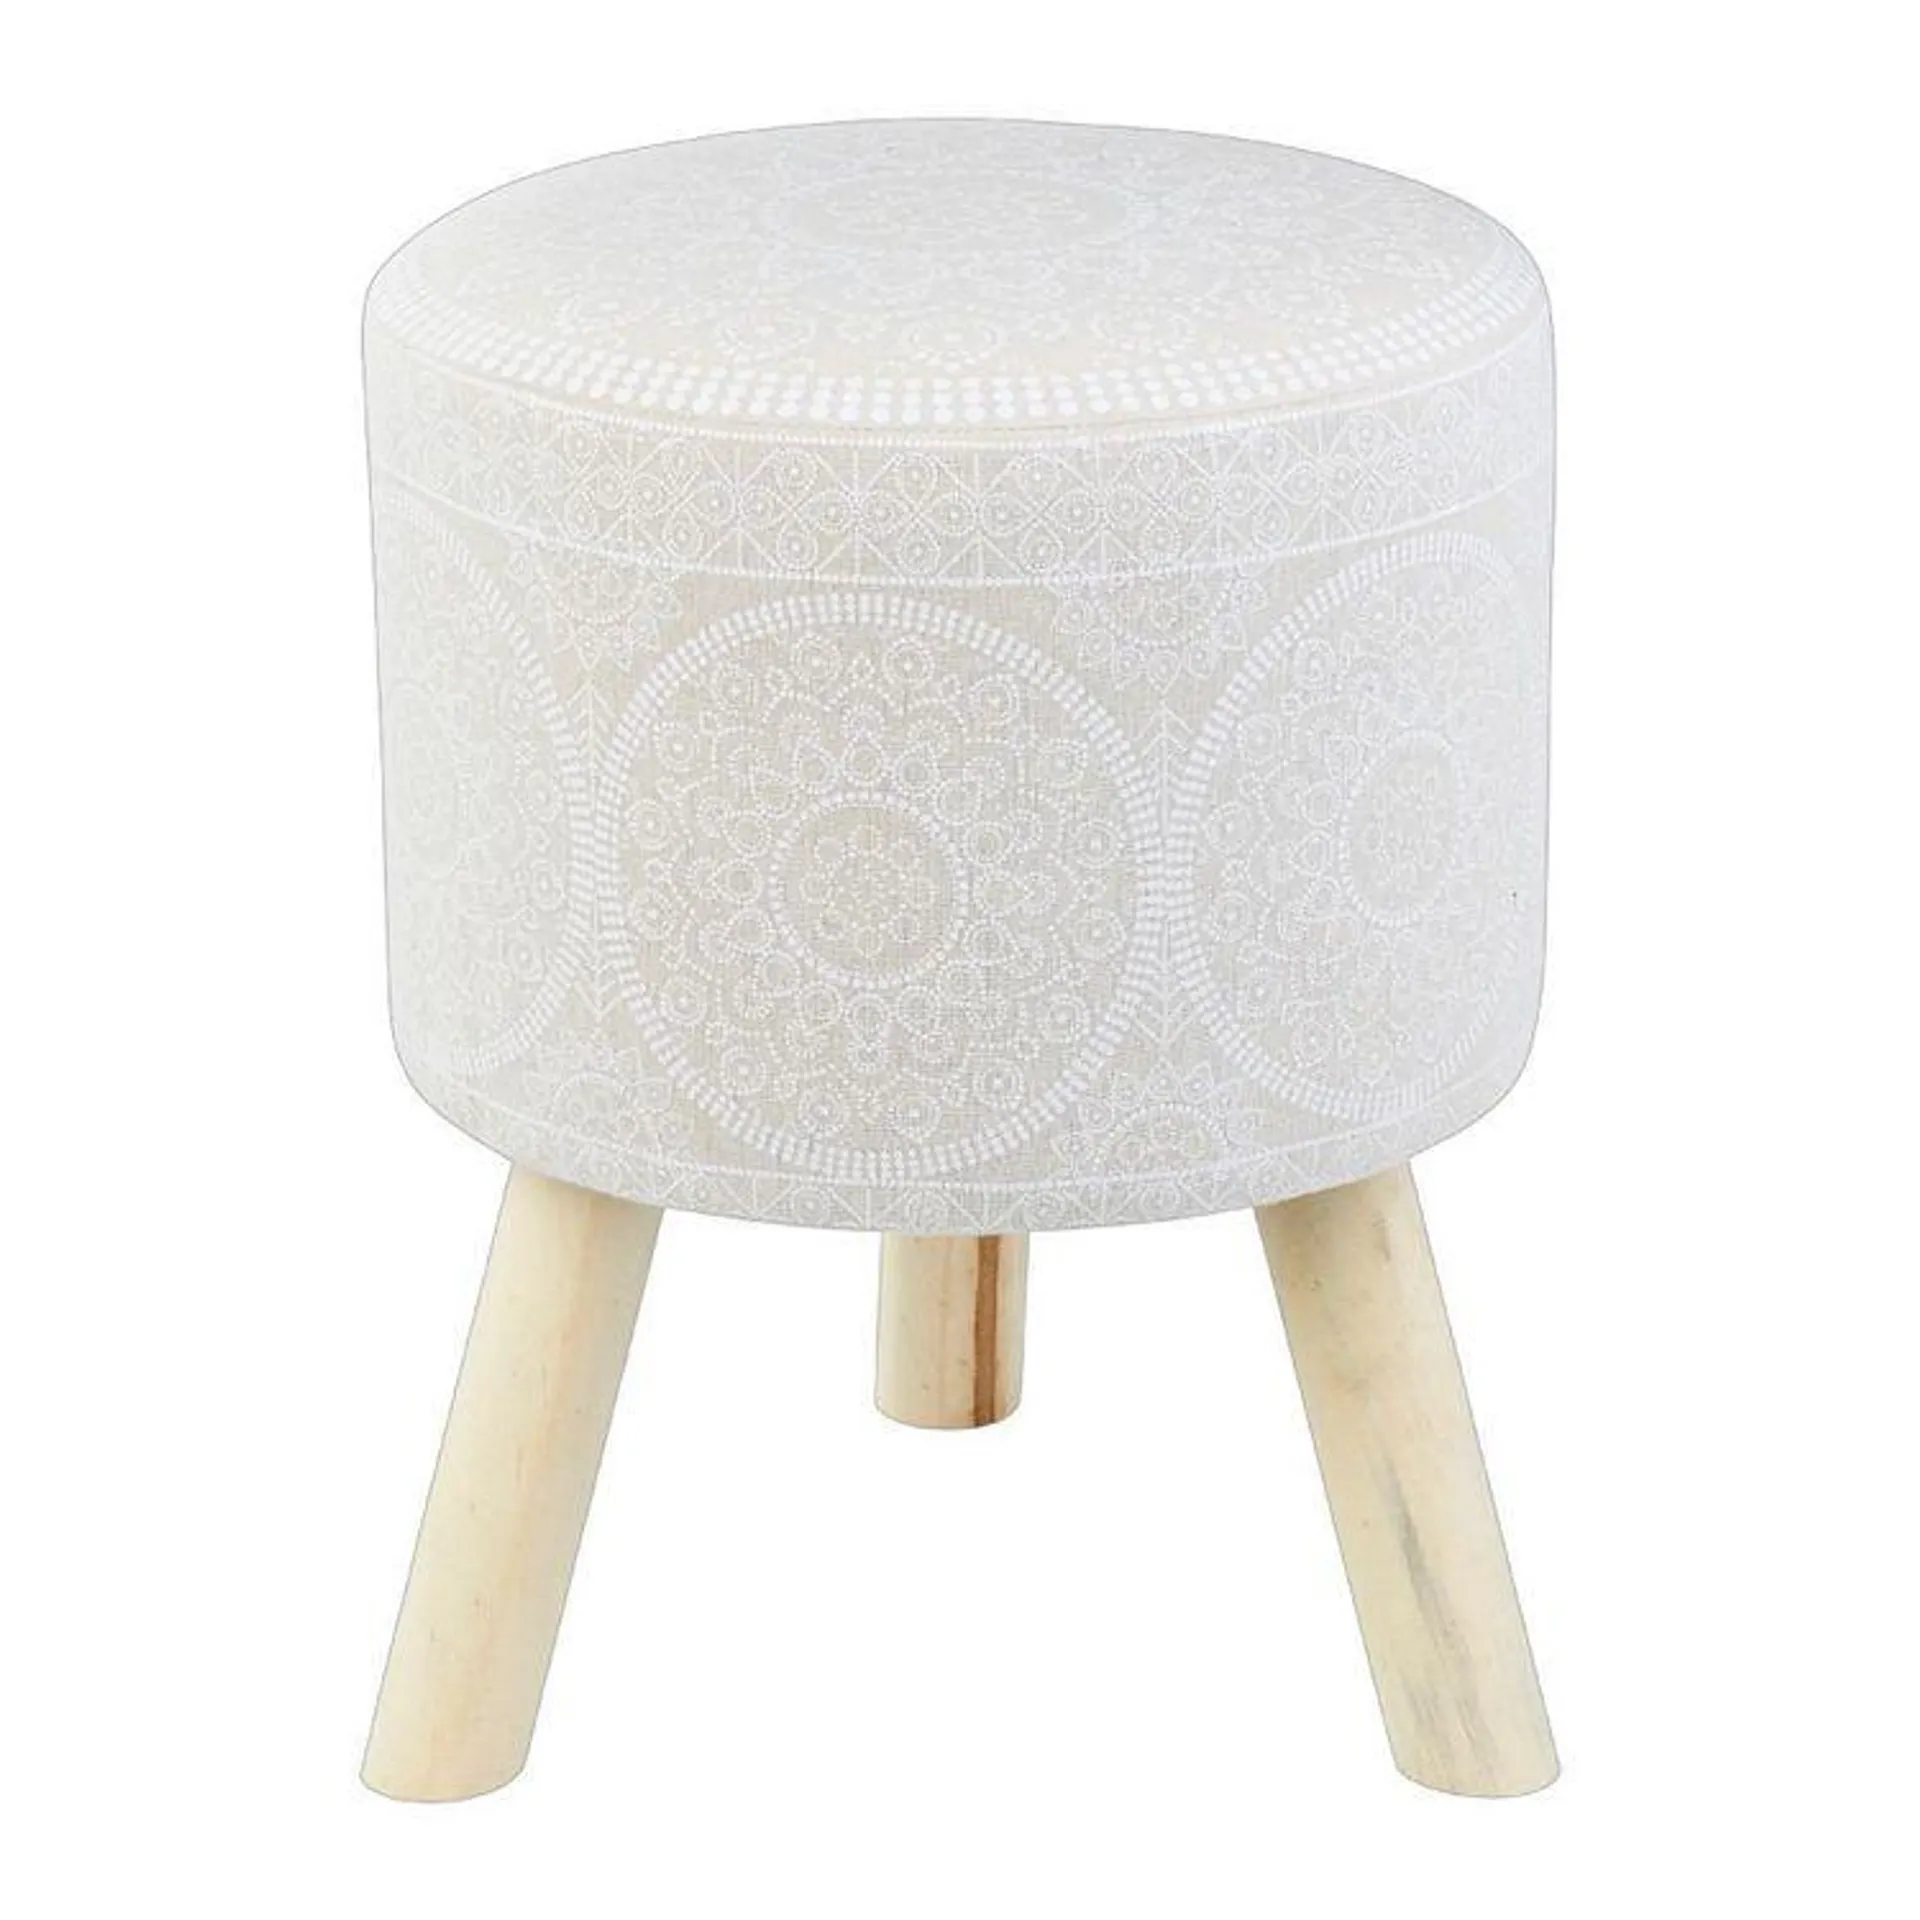 Ombre Home Bohemian Bliss Printed Stool Natural 35 x 45 cm